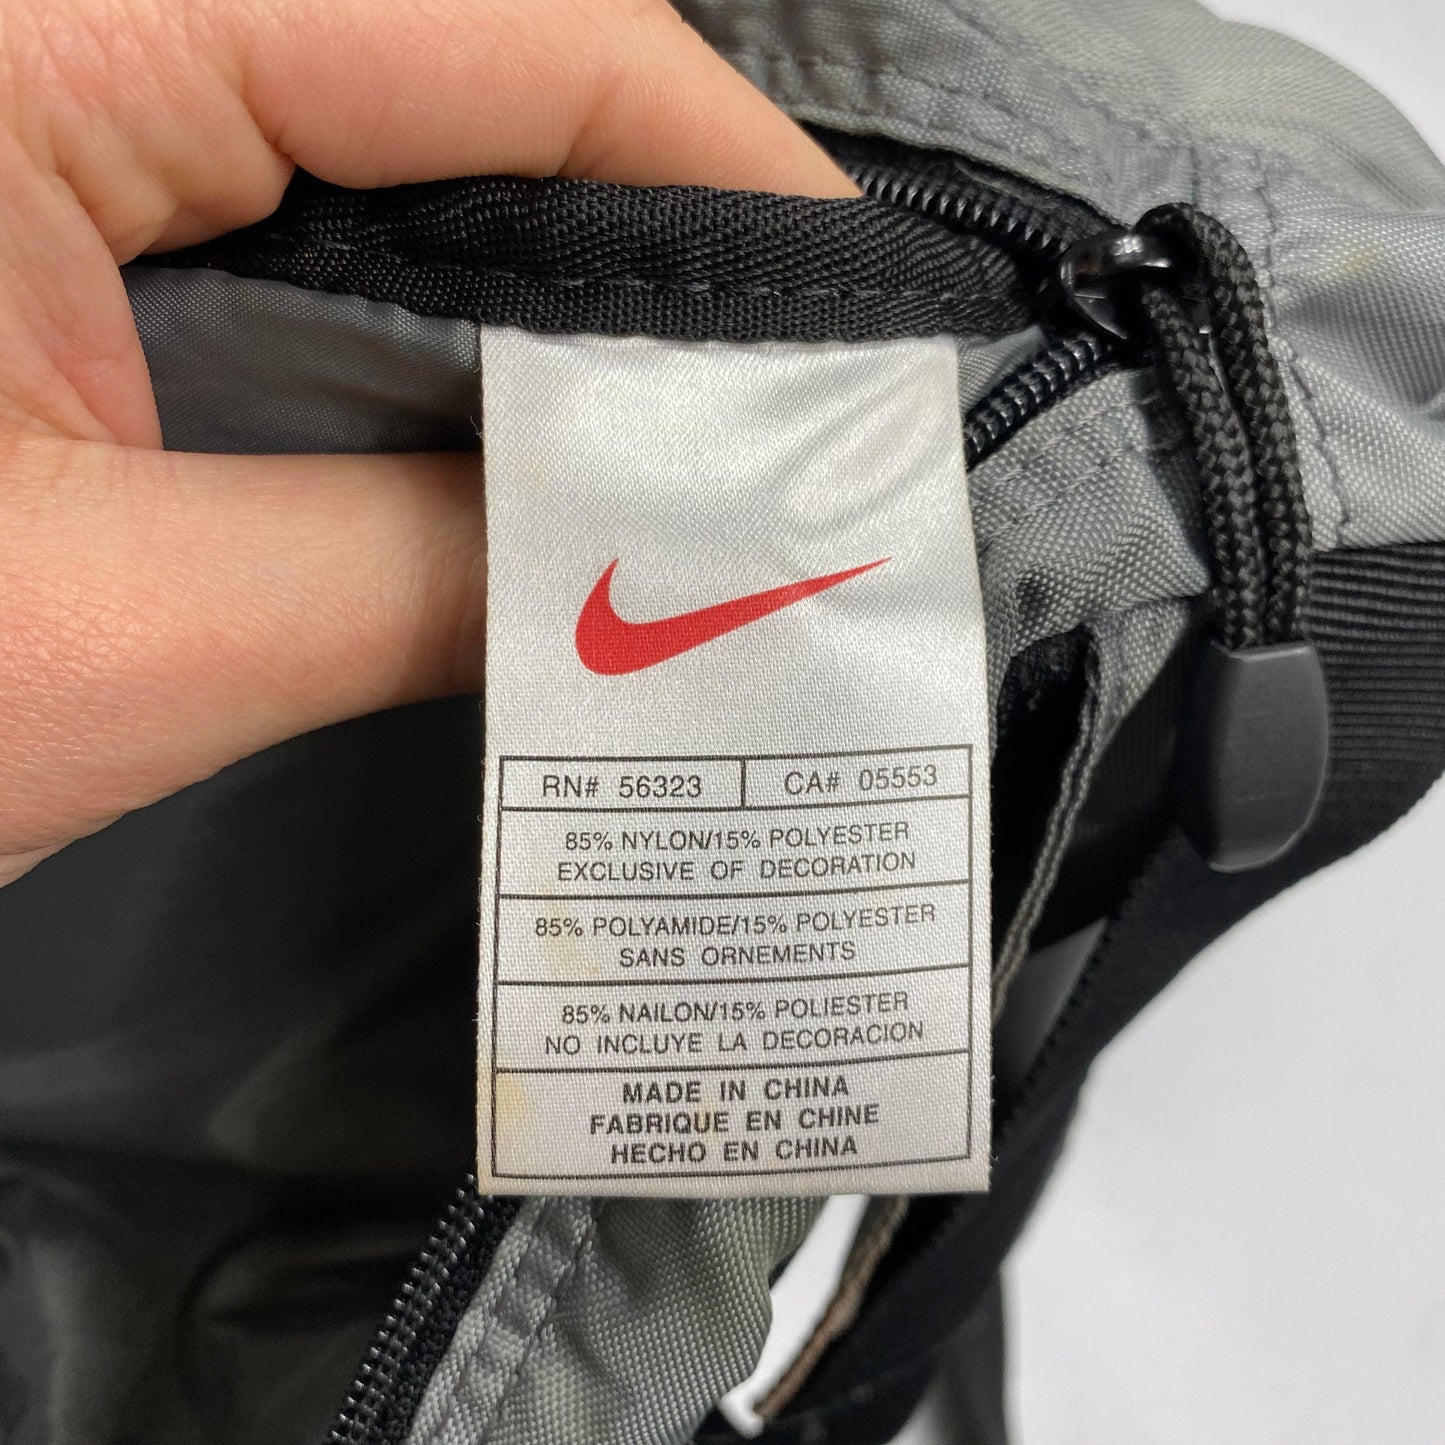 Nike 2003 2 in 1 nylon silver textured slingbag - Known Source